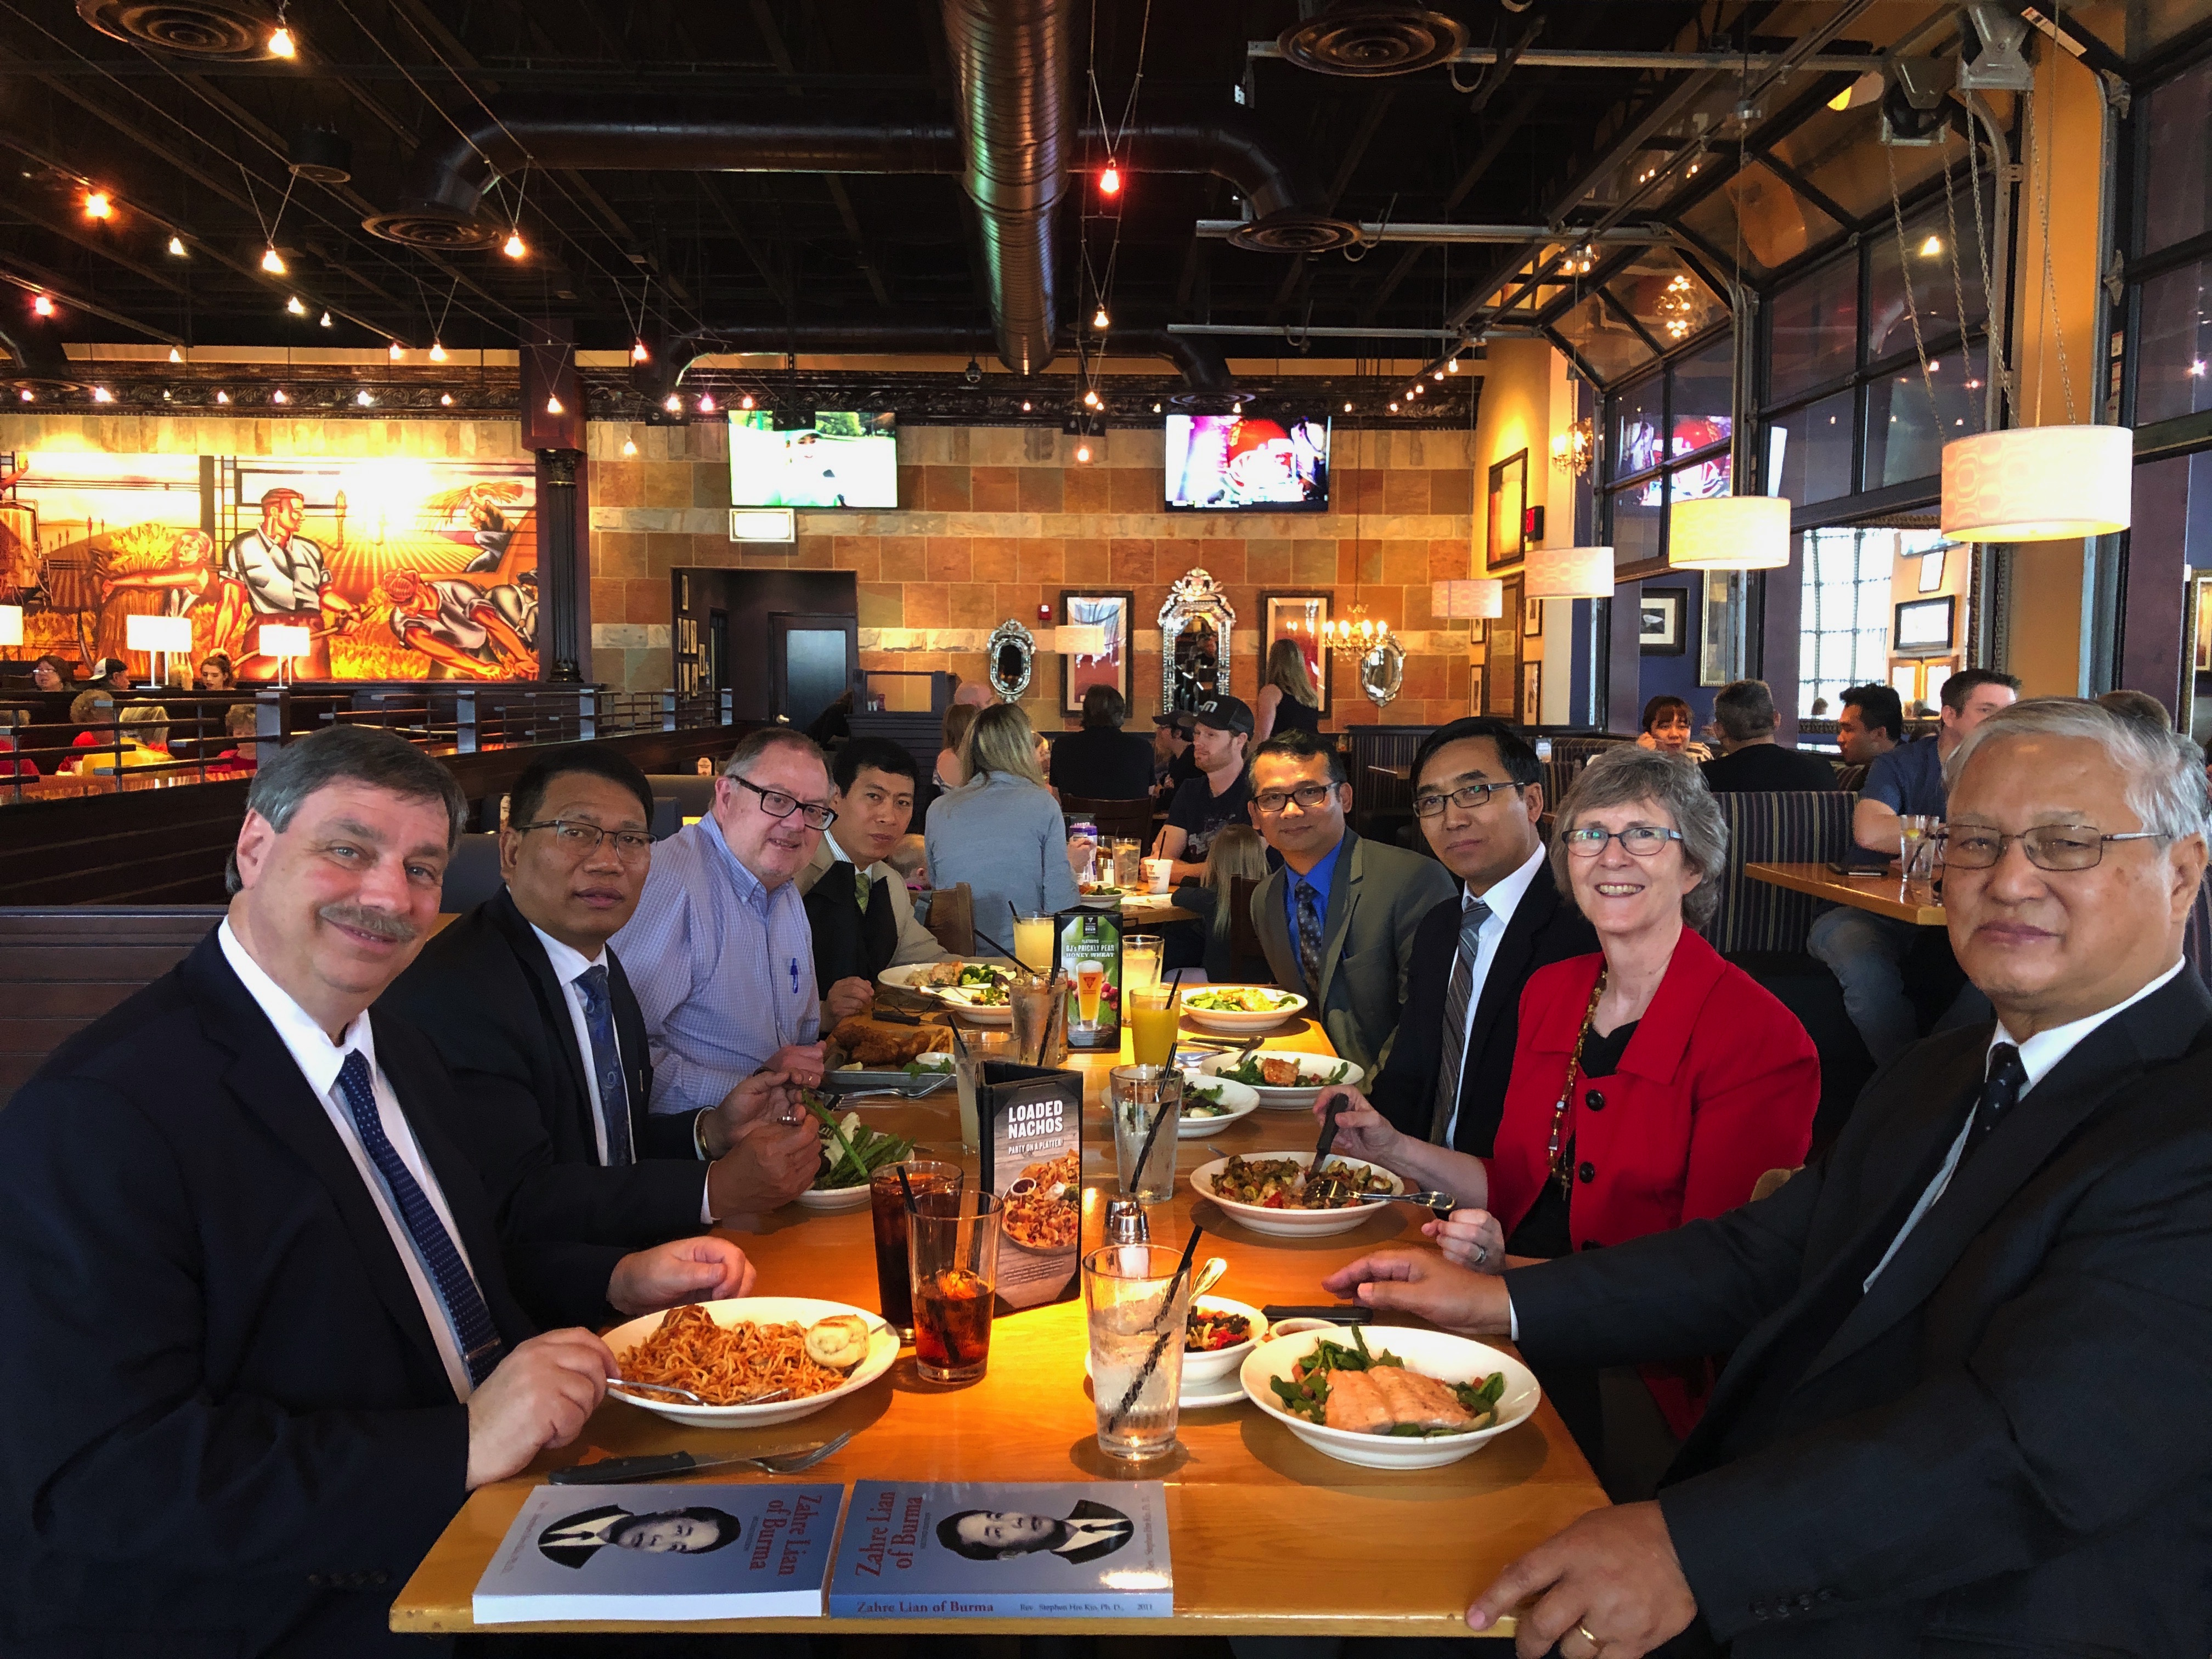 2019-04-07 IN Indianapolis Chin Baptist Church - Dinner with Dr. Spitzer